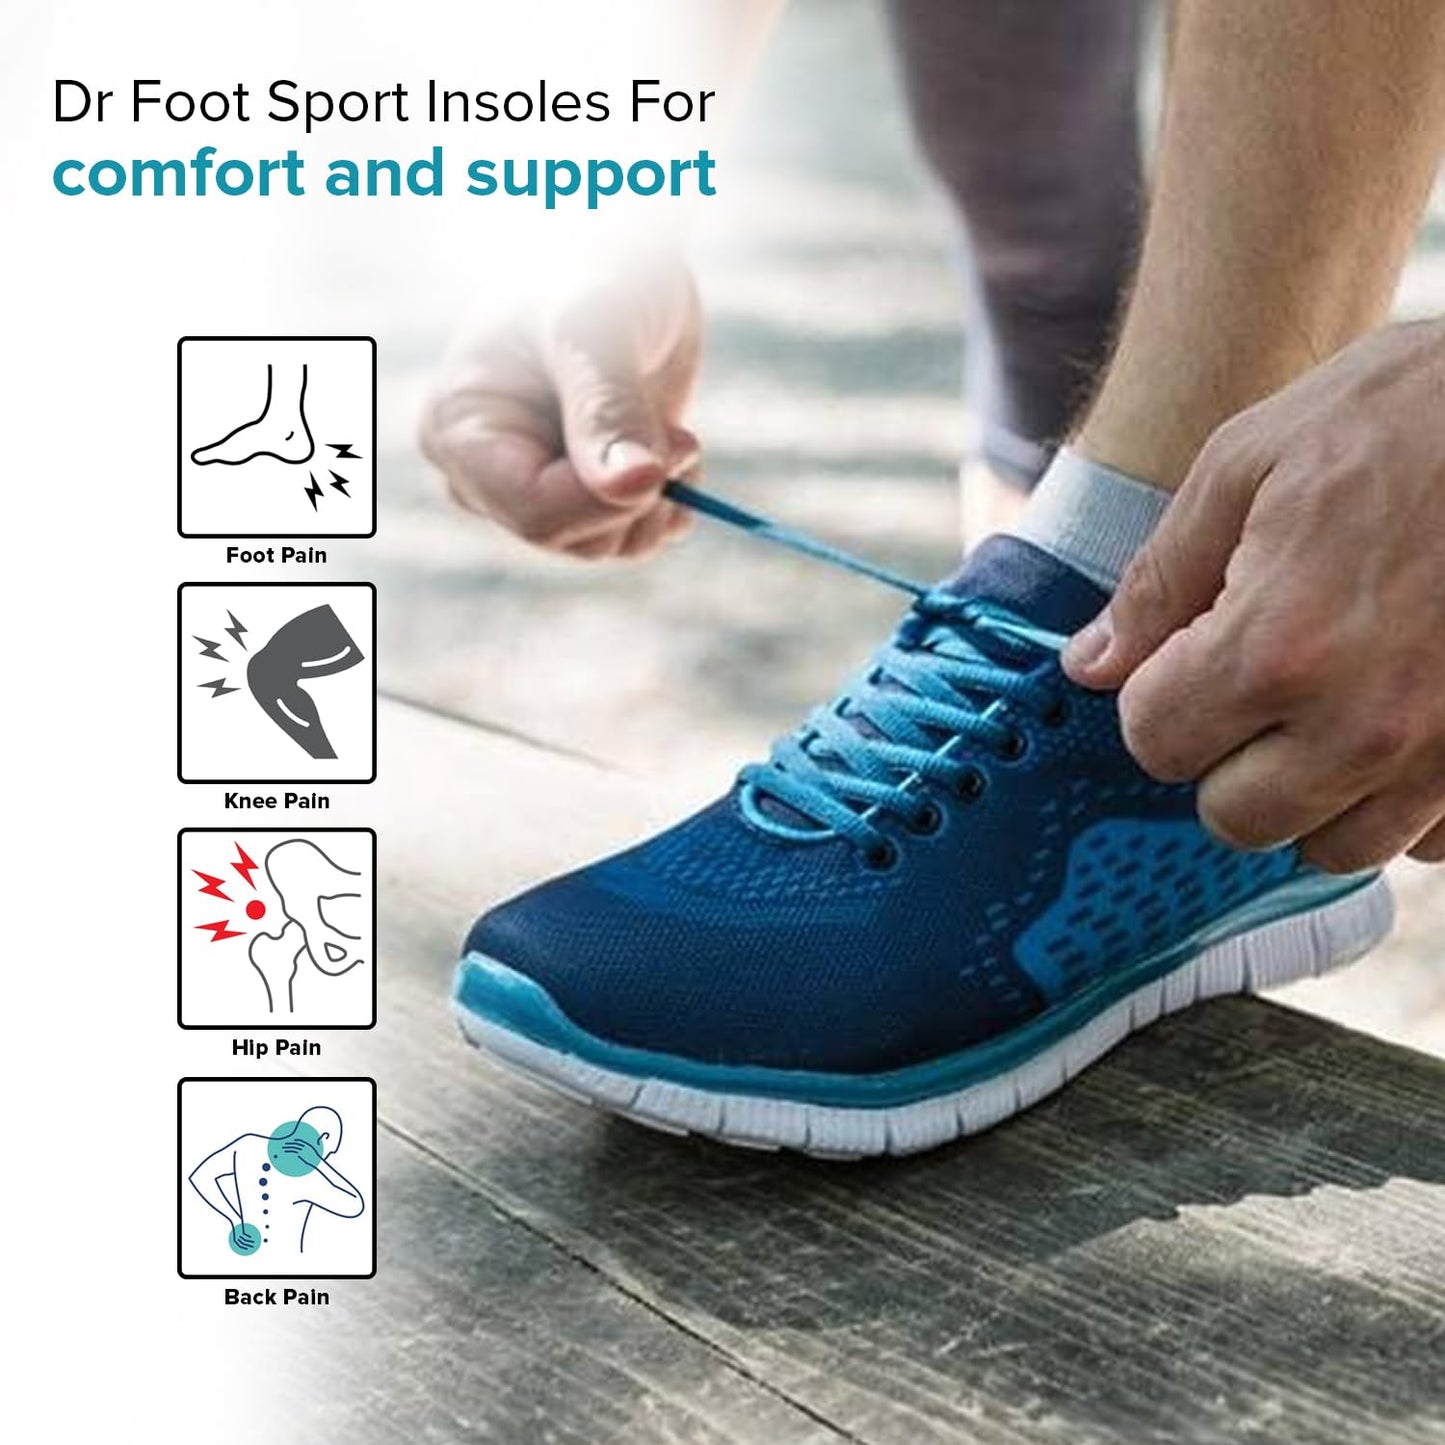 Dr Foot Sport Insole  Support Shock Absorption Cushioning Sports  Enhance Performance and Comfort for Running Hiking Working  Fits Running Shoes  For Men  Women - 1 Pair Large Size